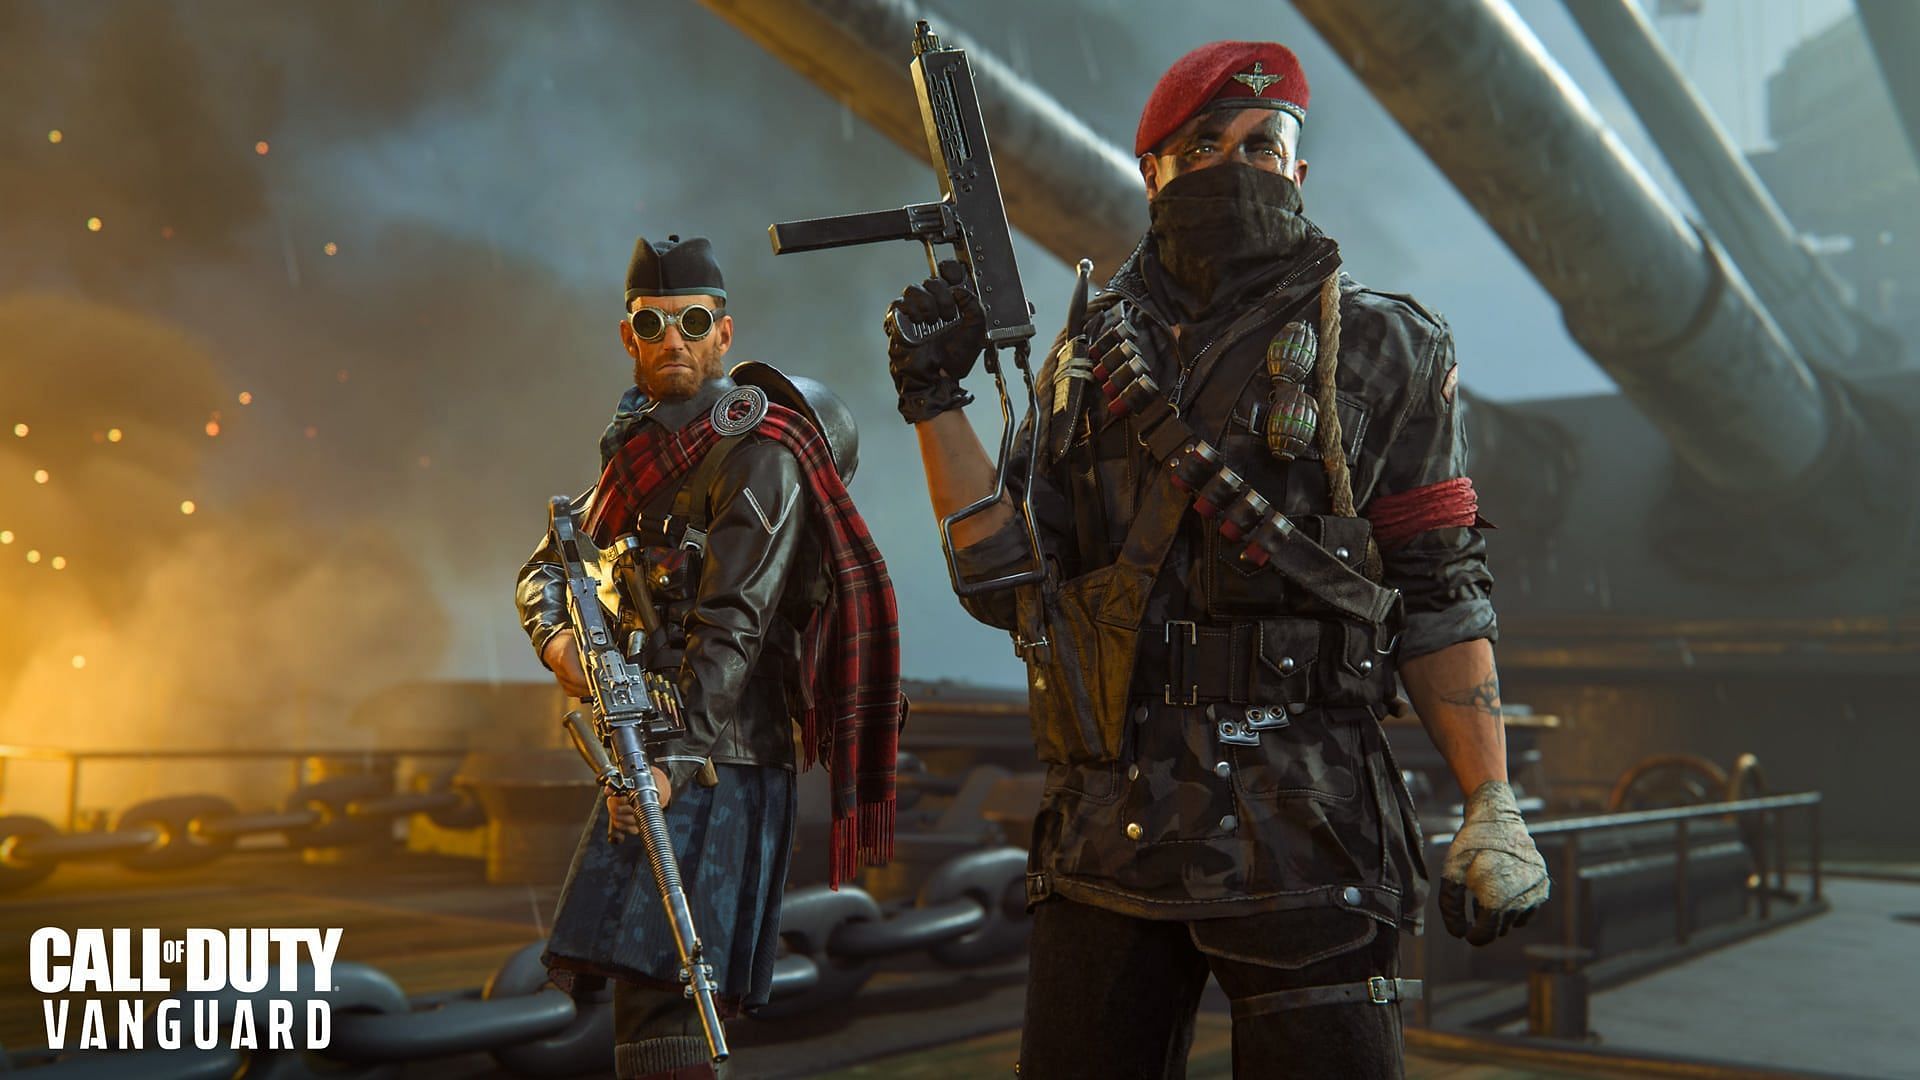 An operator in Call of Duty: Vanguard with the Marco 5 (Image via Activision)